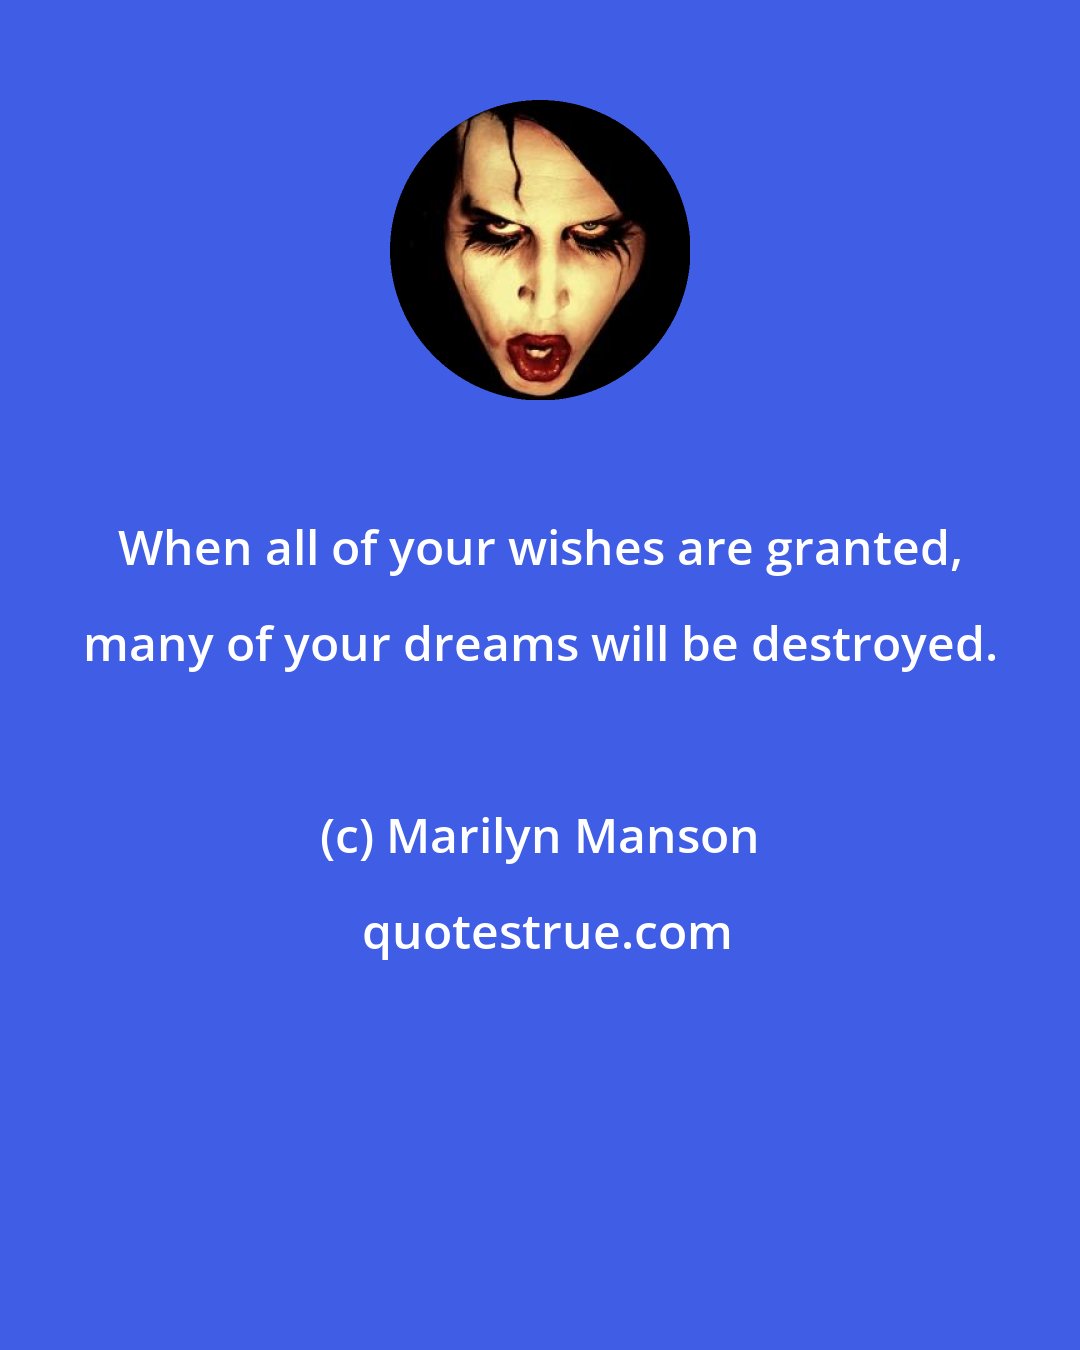 Marilyn Manson: When all of your wishes are granted, many of your dreams will be destroyed.